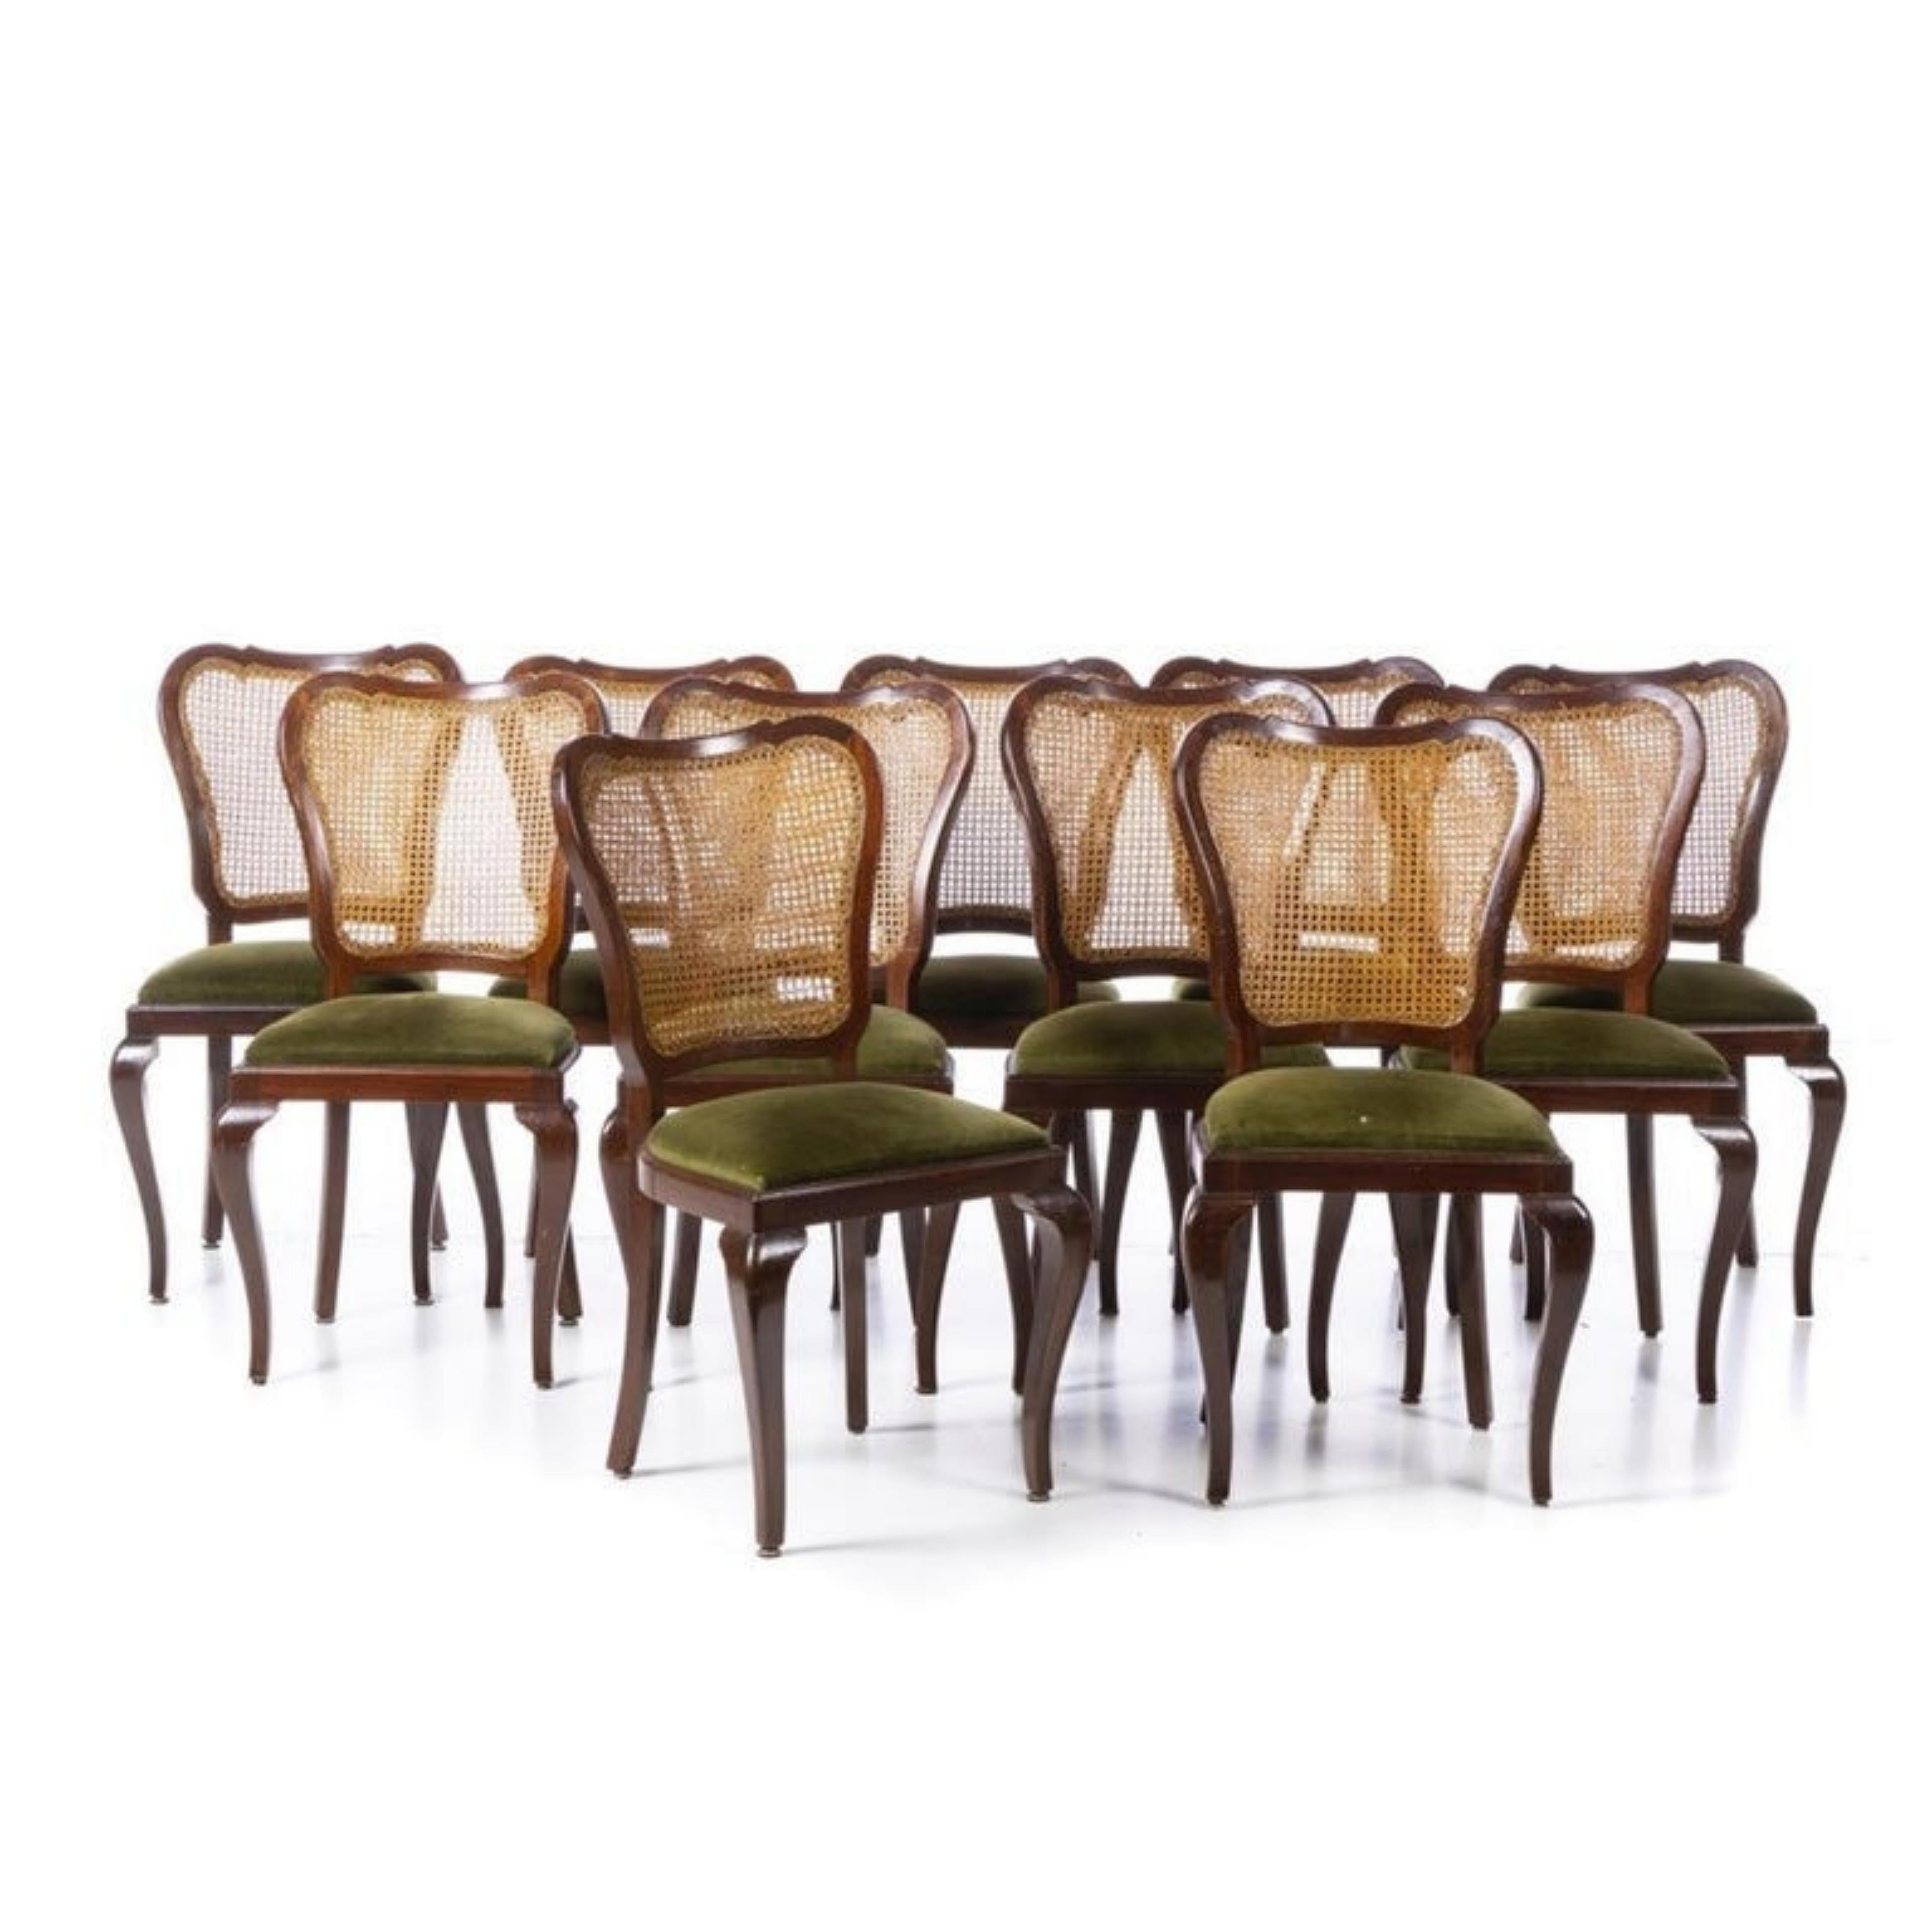 Baroque 11 Portuguese Chairs from the 20th Century in Mahogany For Sale